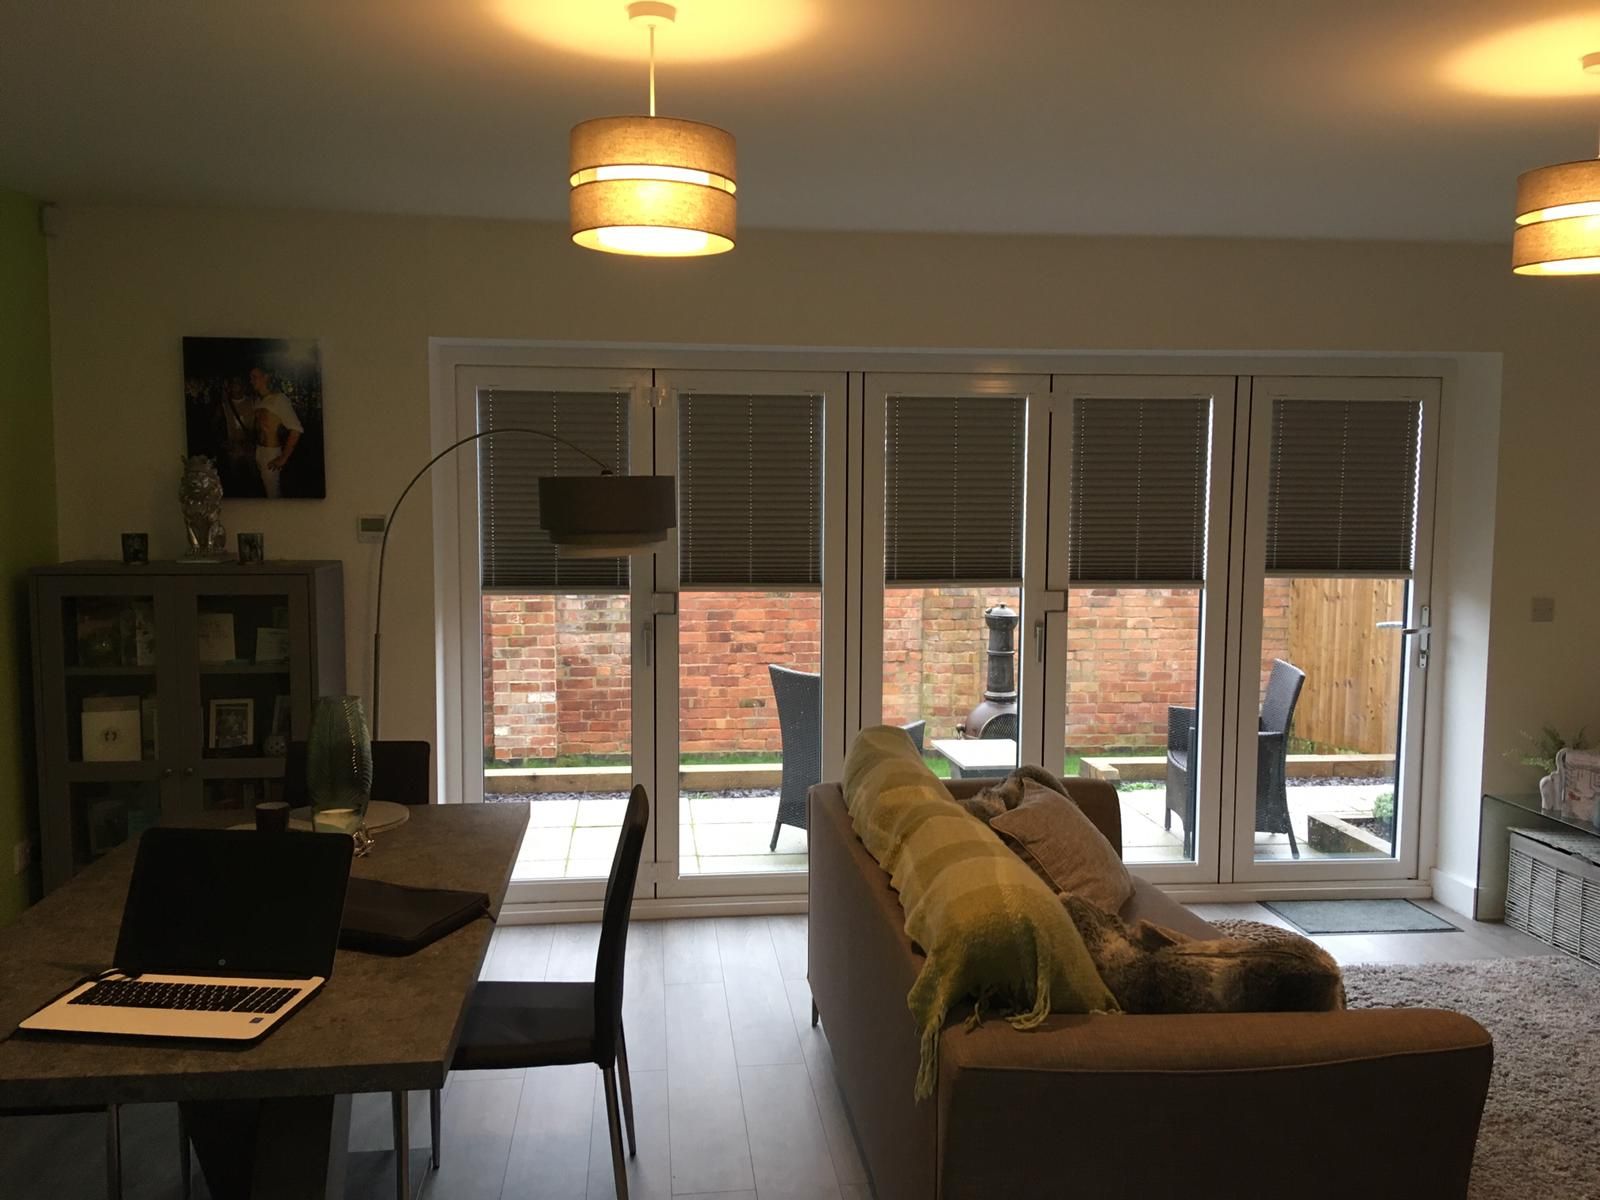 Suppliers of Space-Saving Pleated Blinds